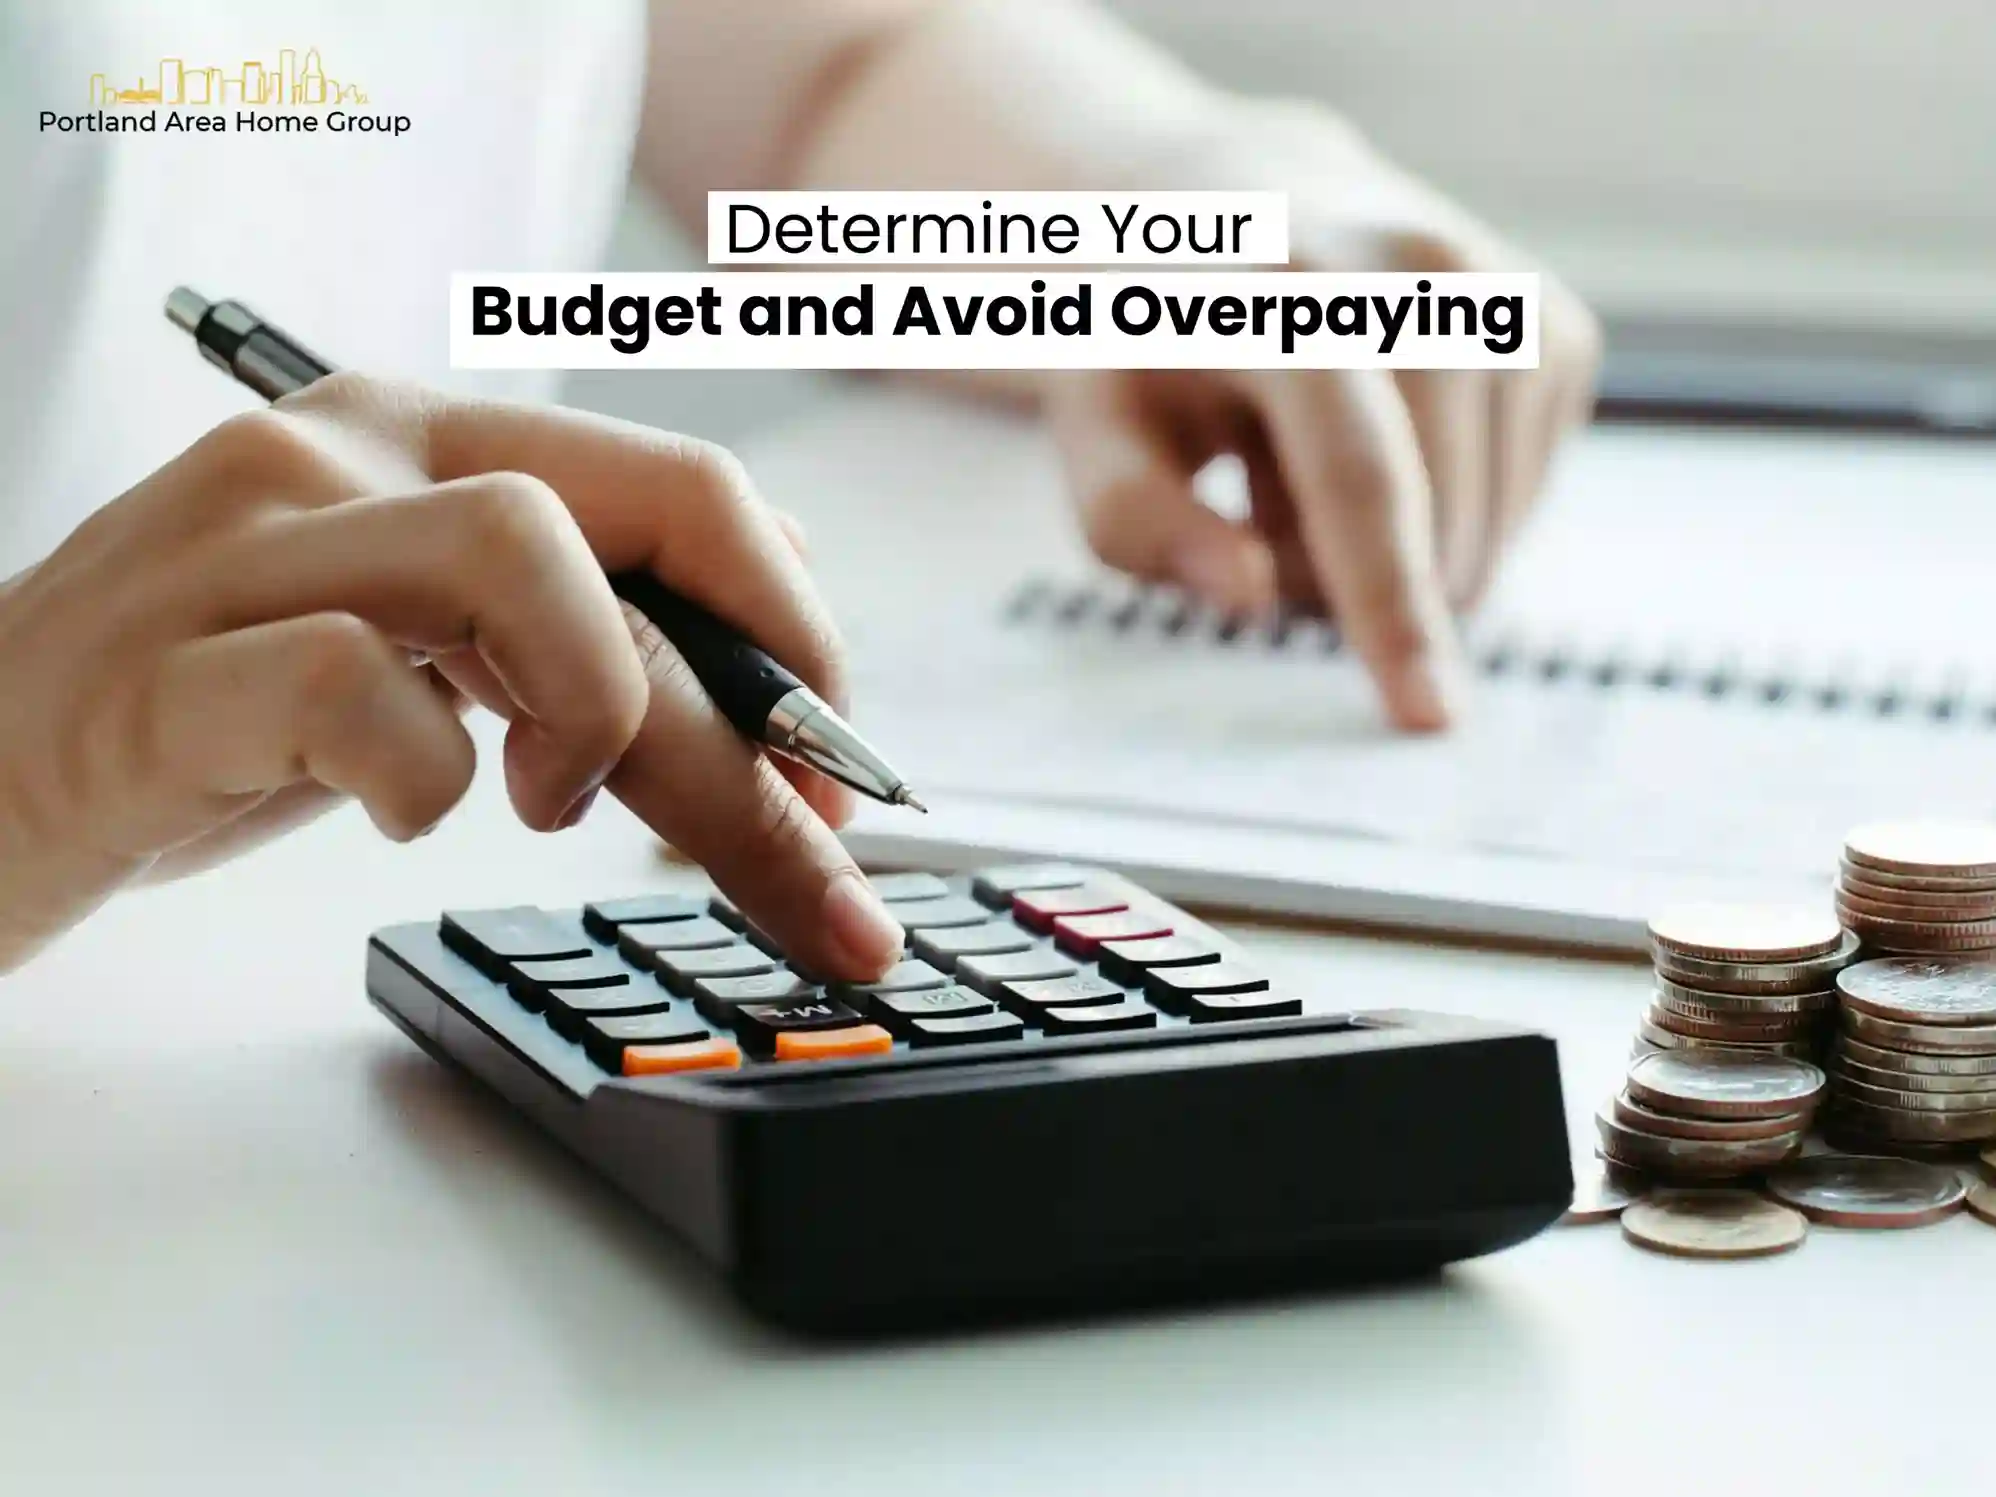 Determine Your Budget and Avoid Overpaying